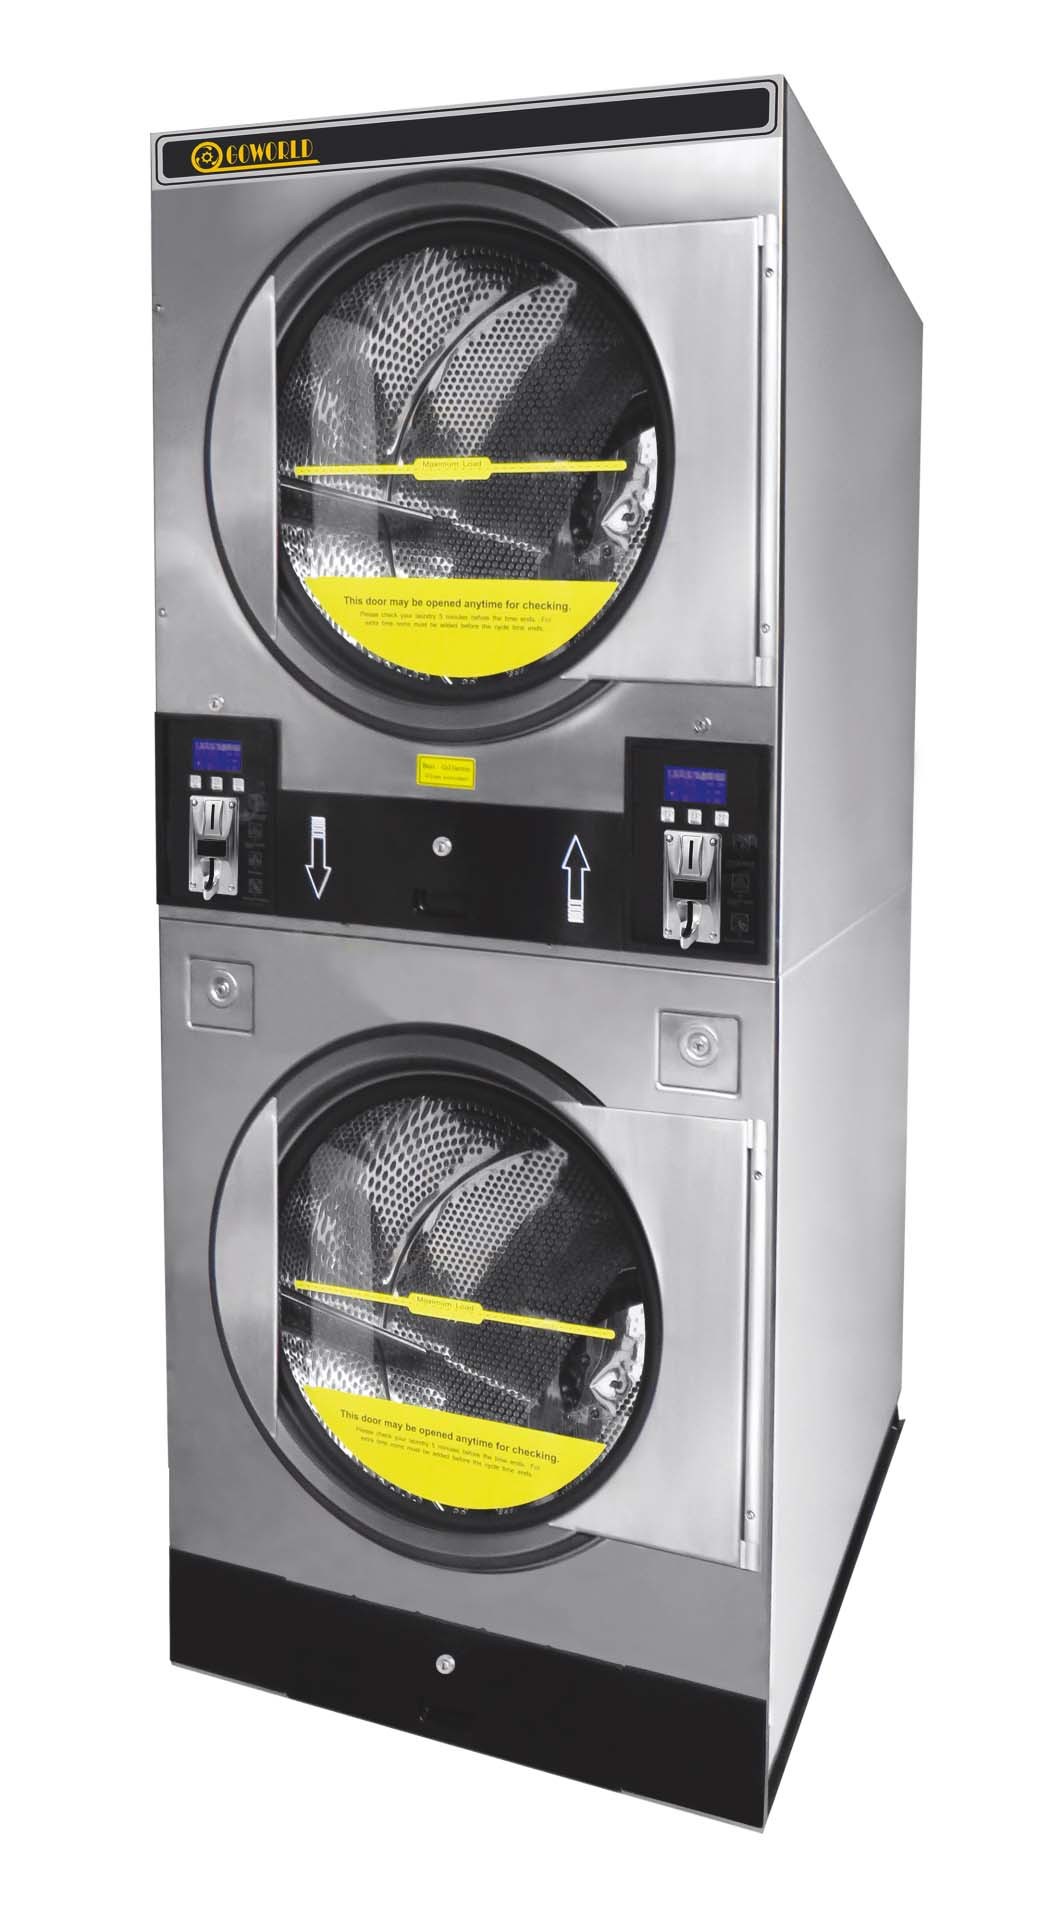 2*12kg gas heating commercial laundry dryer,tumble drying machine